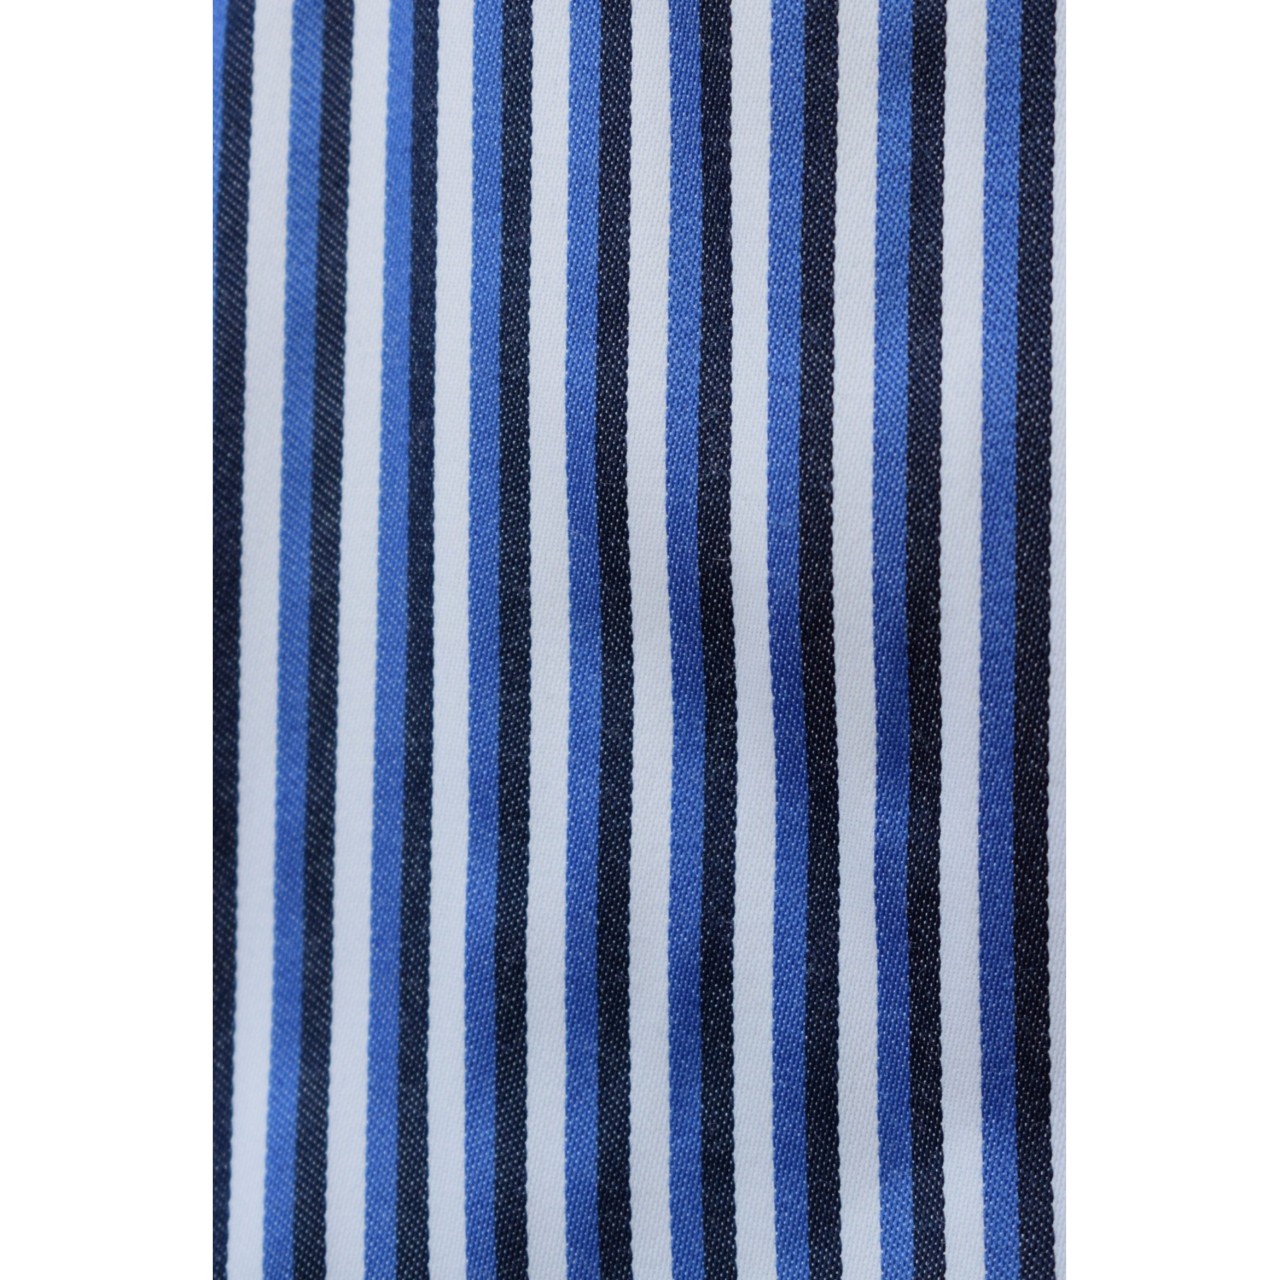 White Blue Black Pin Stripes Double Needle Stitched Formal Shirt